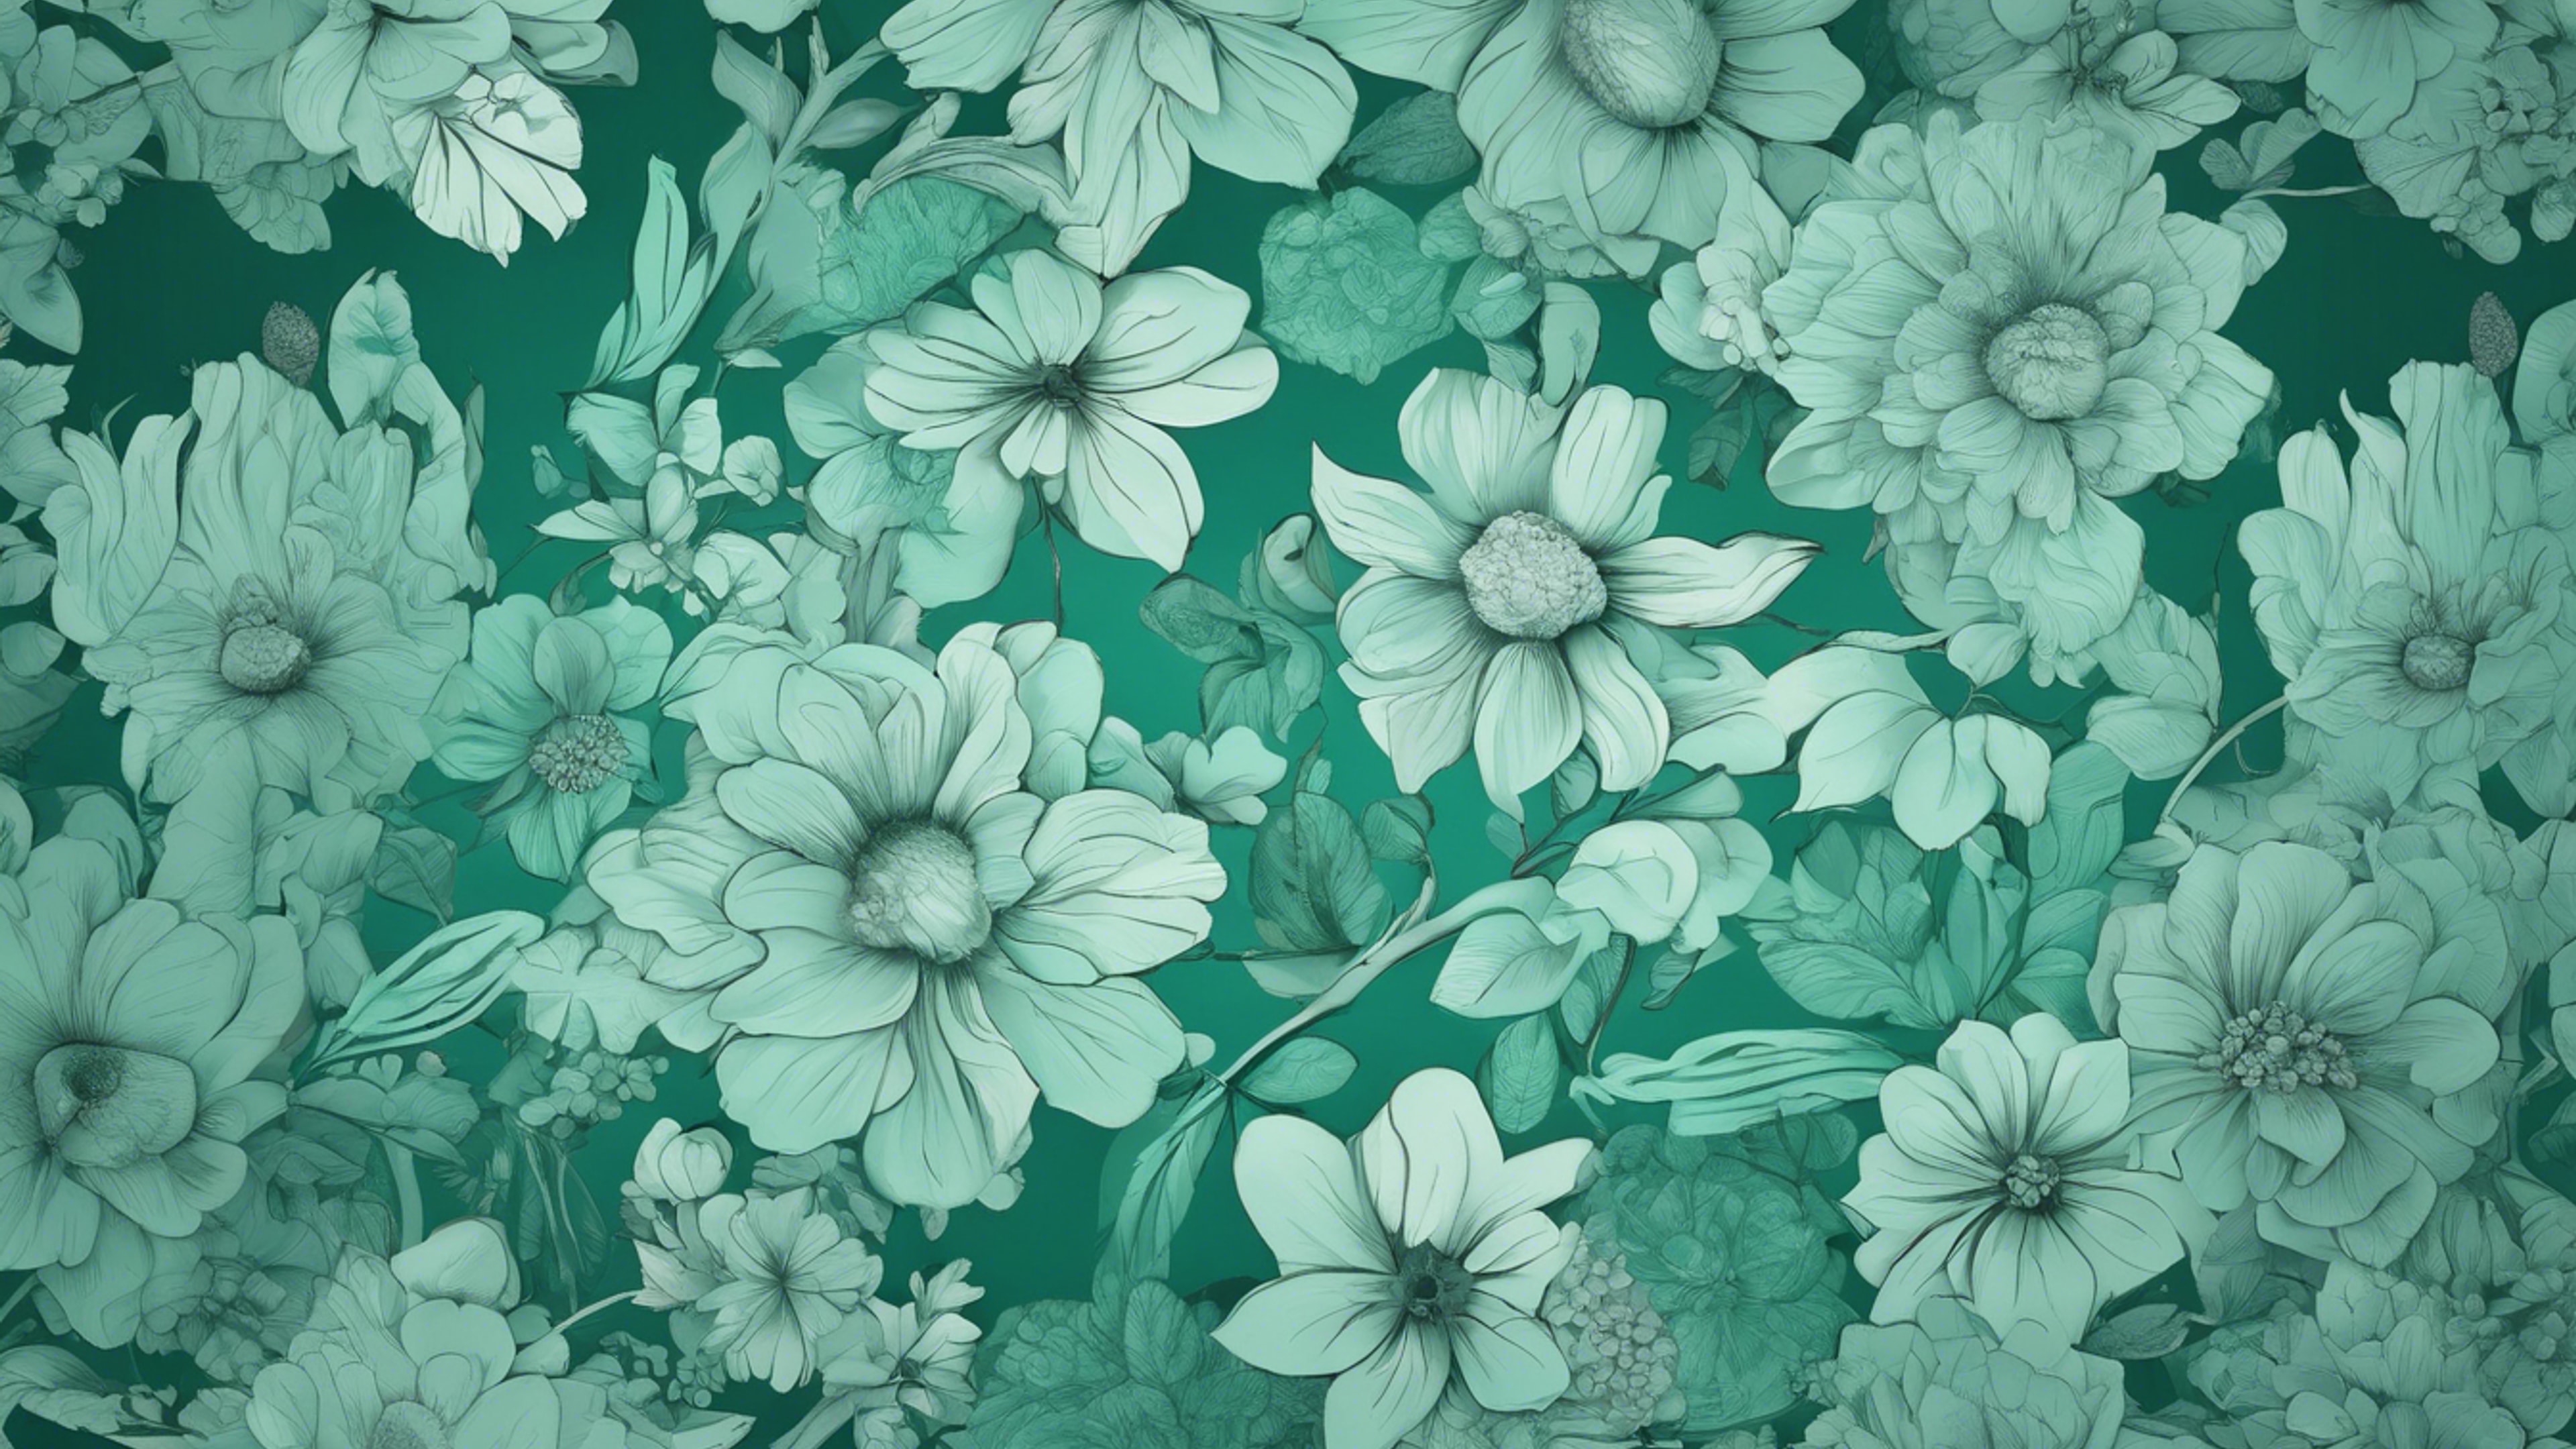 A monochromatic floral pattern done in various shades of a calming sea green.壁紙[204b019b992940b9b3e4]